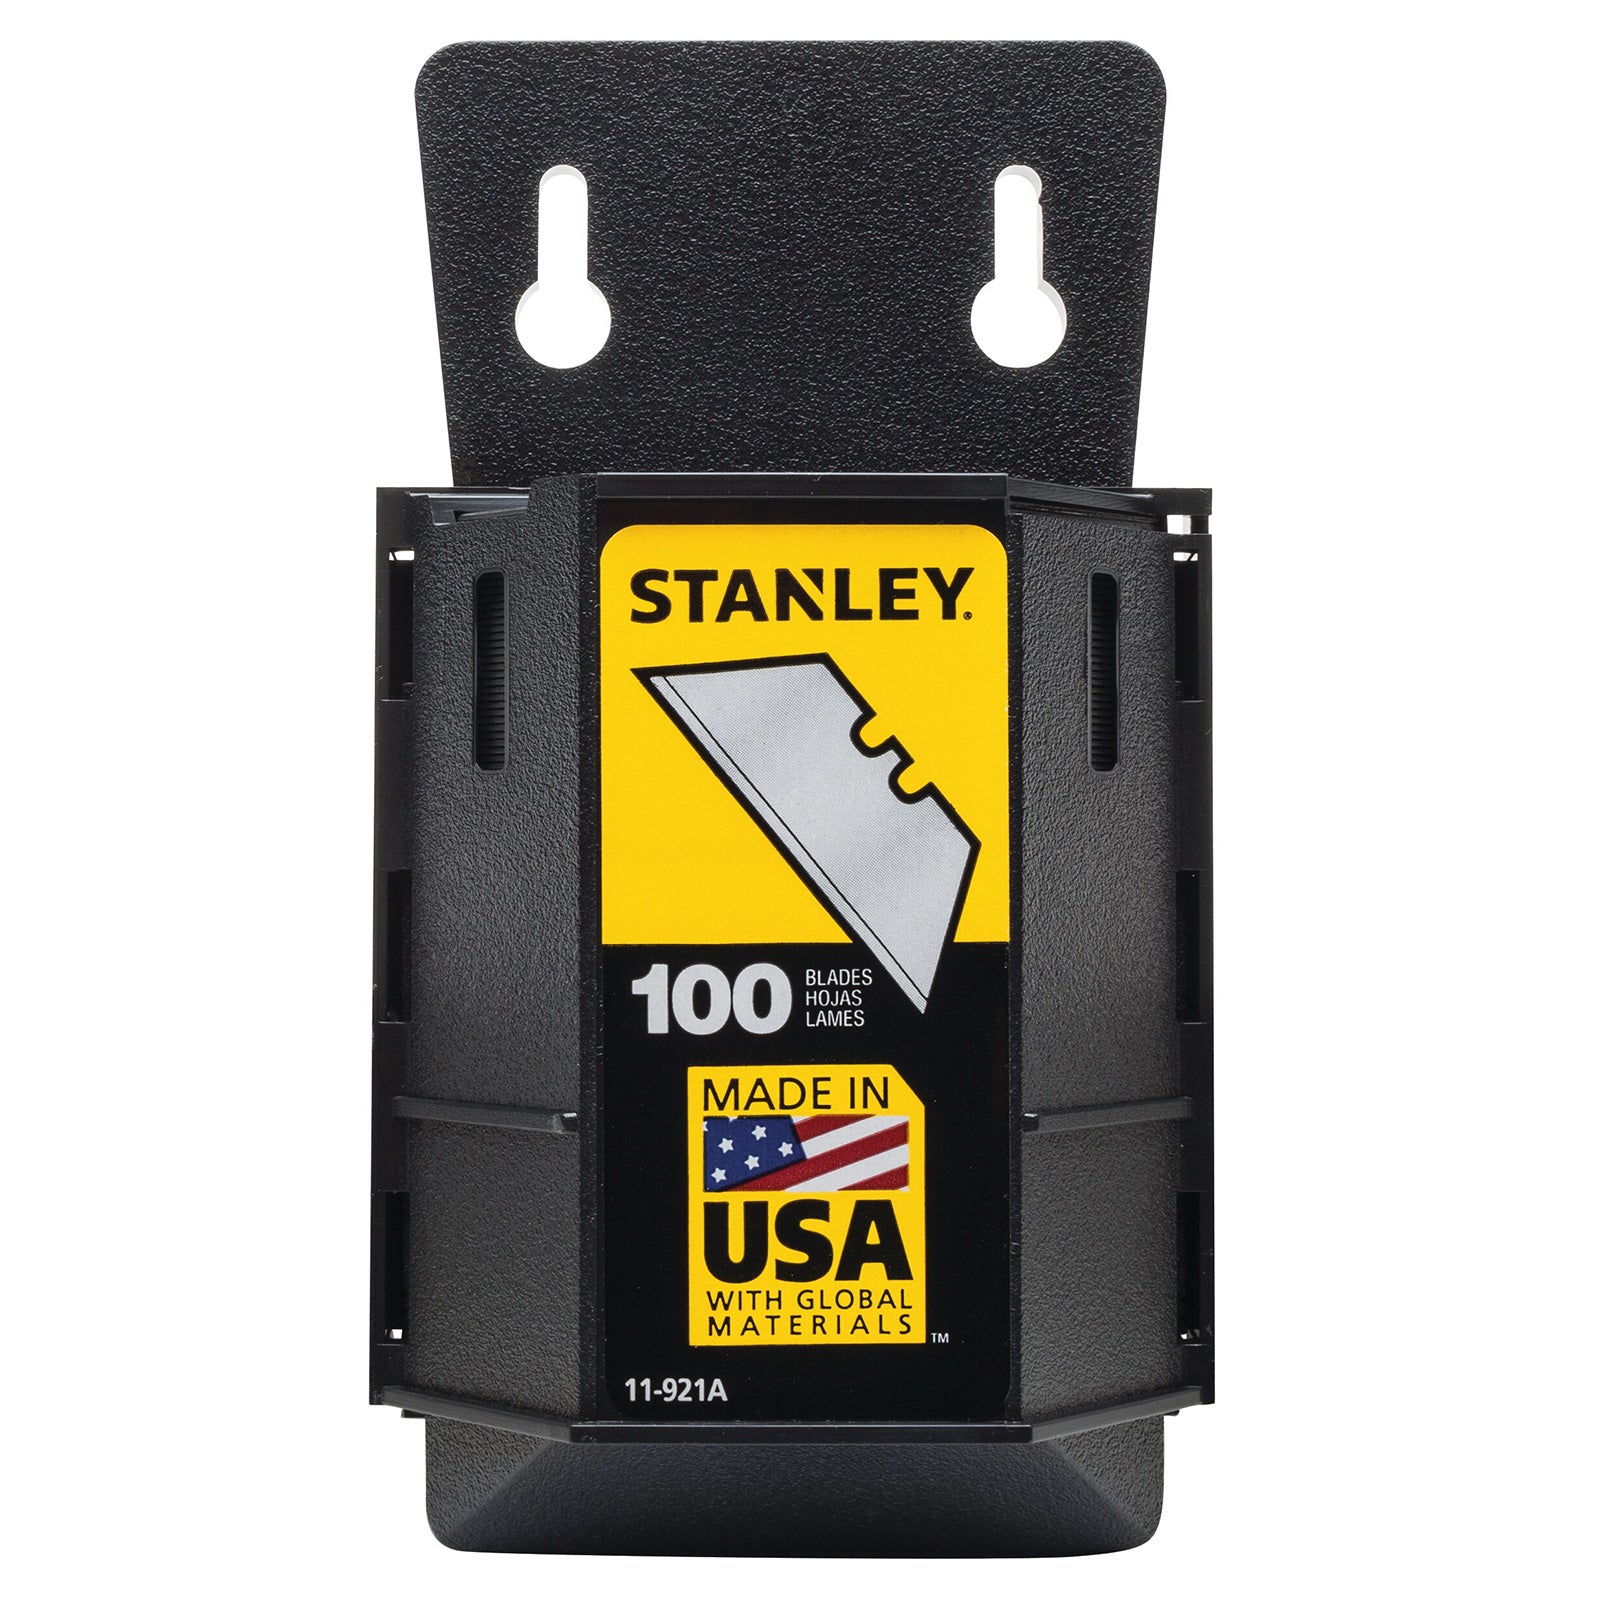 Stanley Power Tools, Stanley catalog 562, division of the Stanley